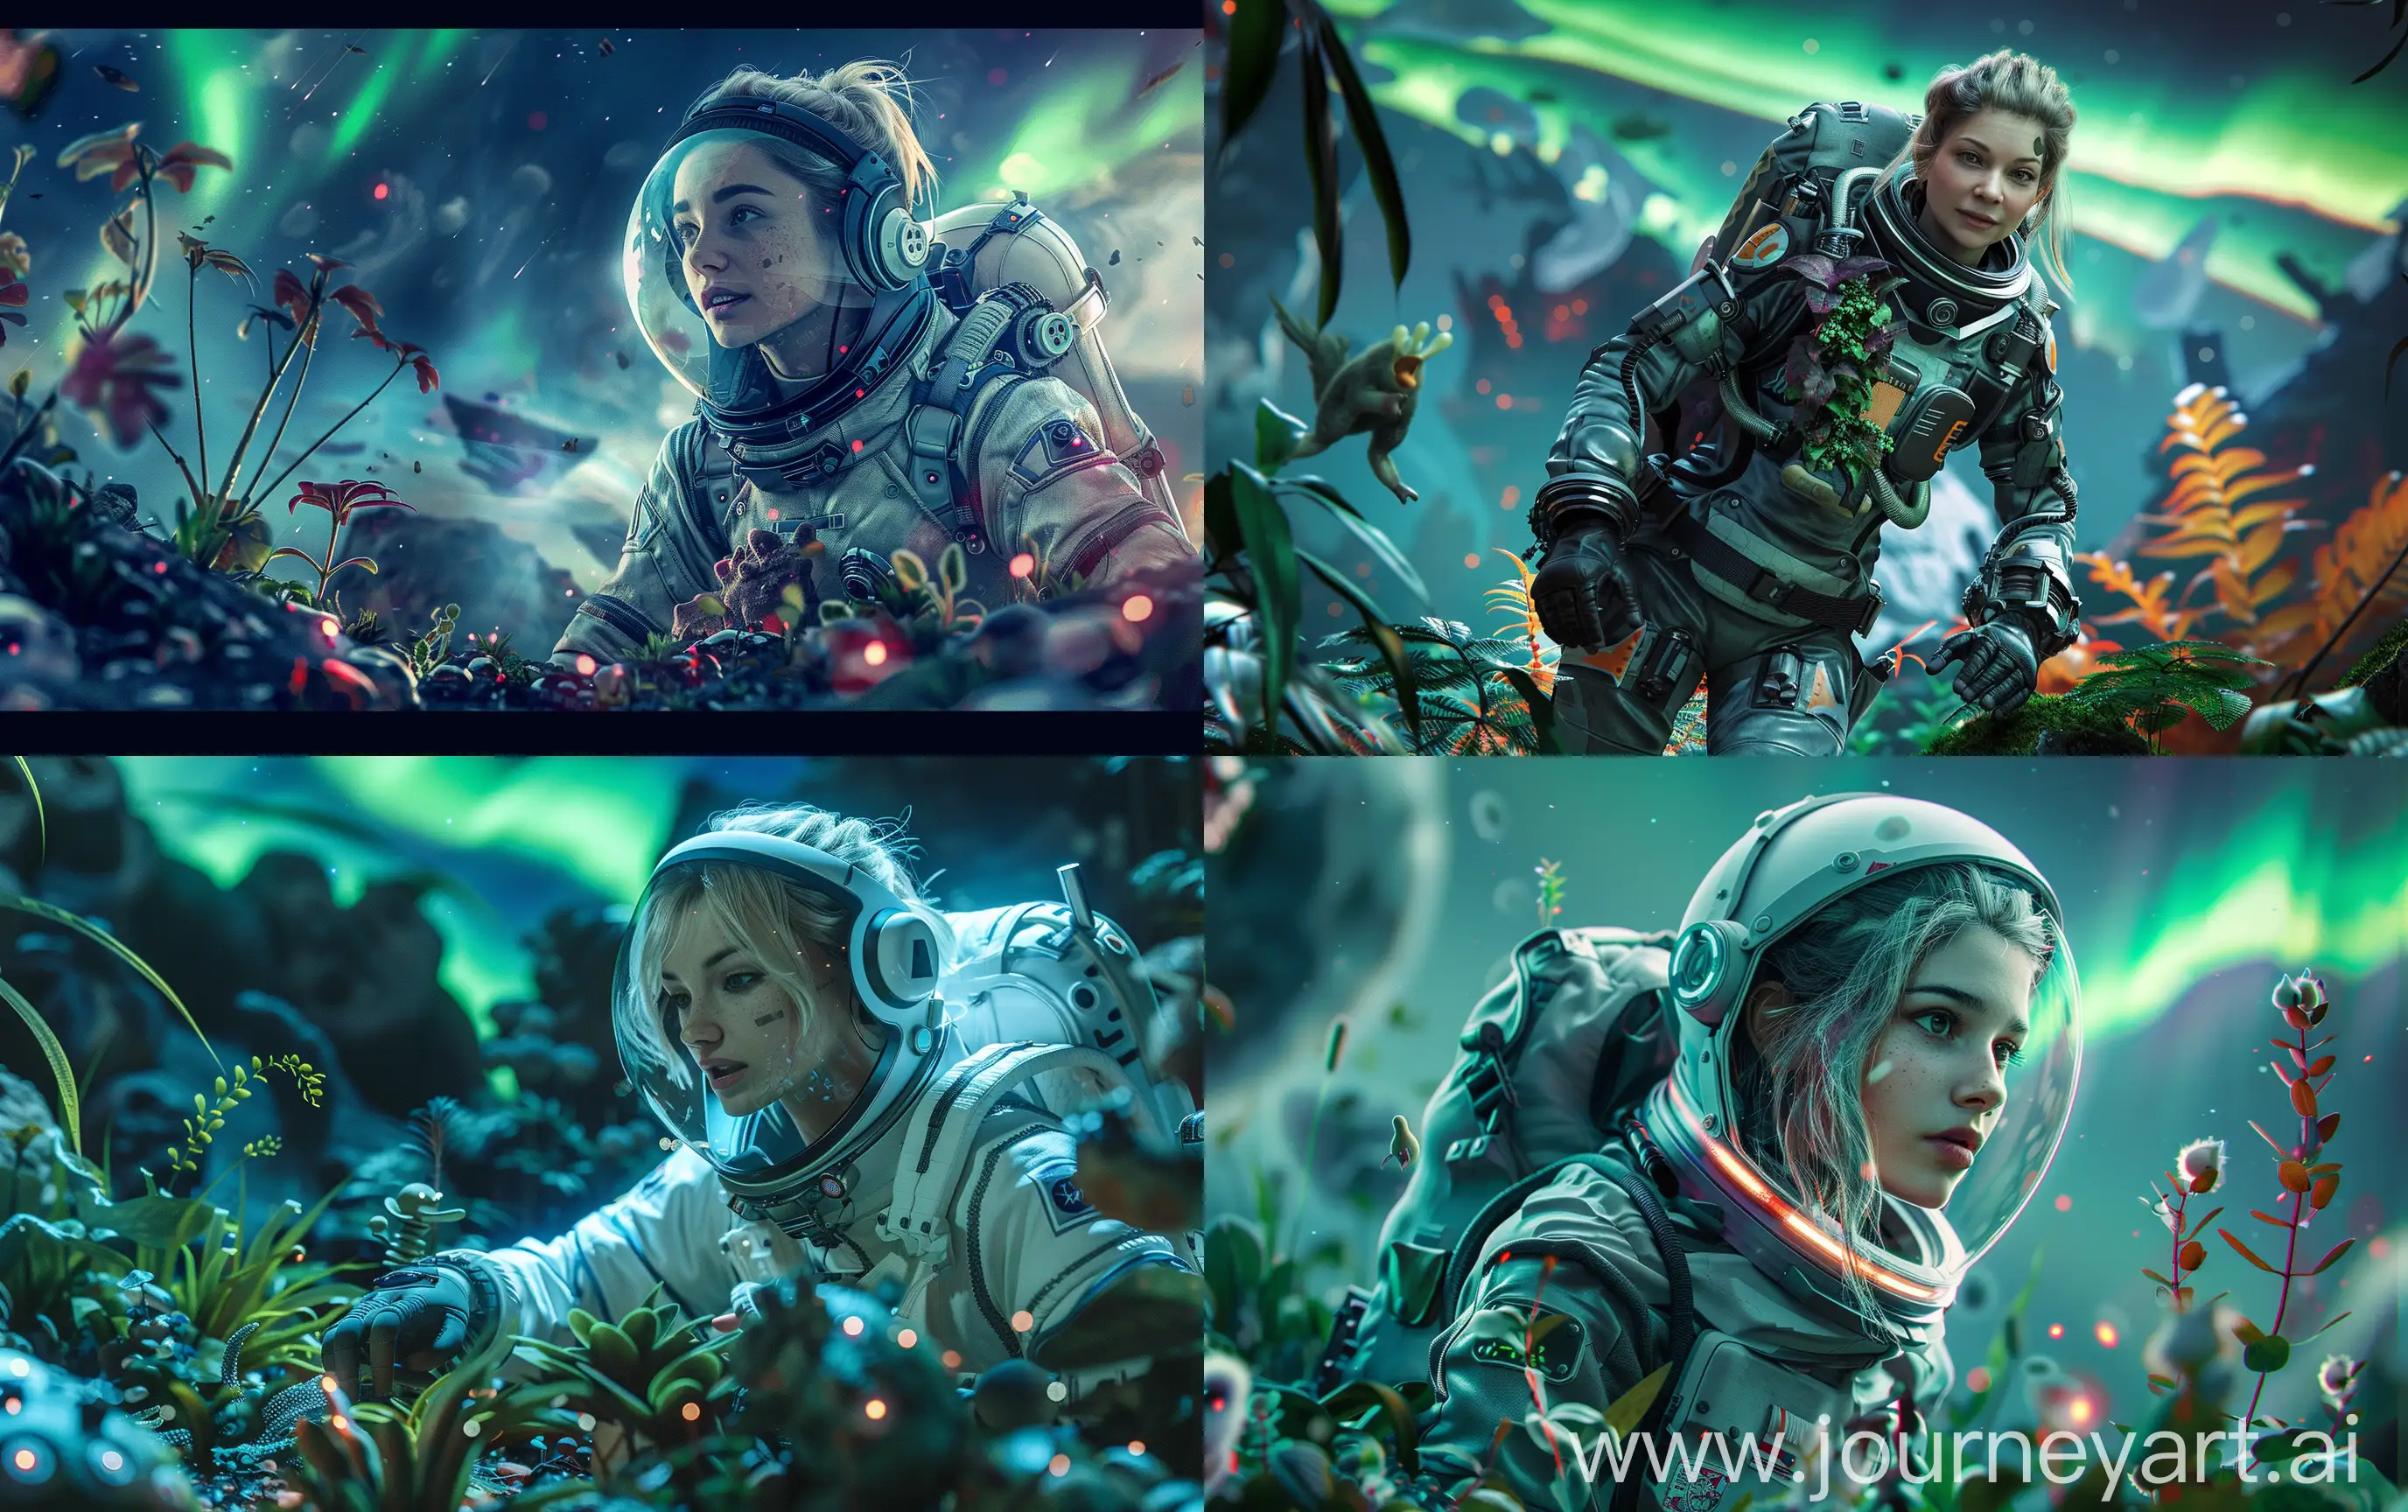 Young-Astronaut-Explores-Exotic-Alien-World-with-Friendly-Creatures